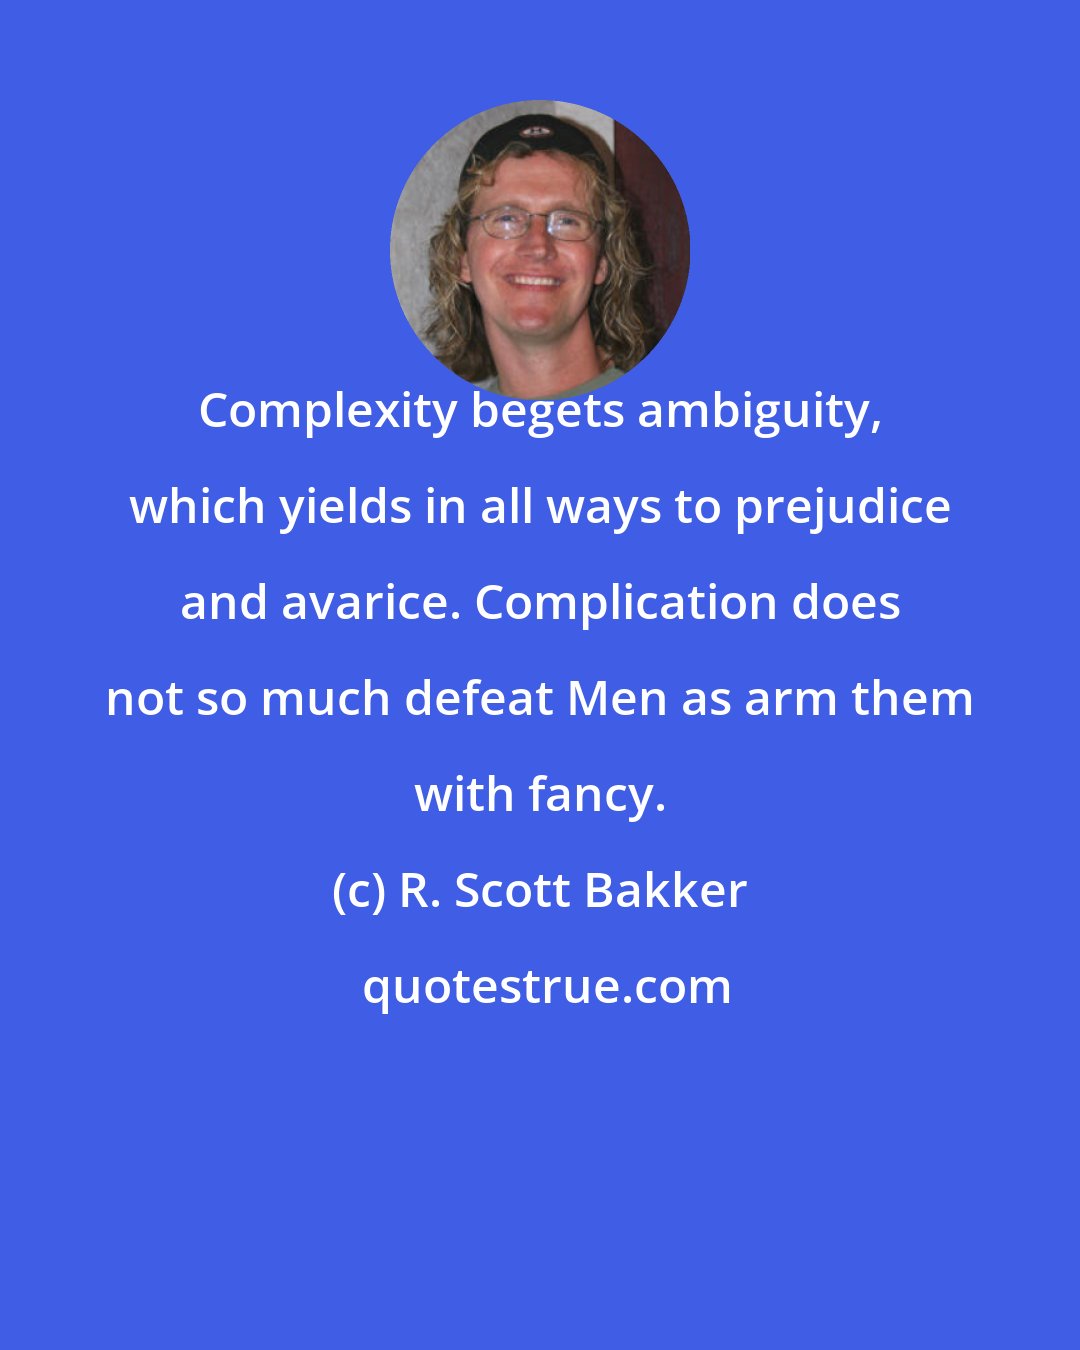 R. Scott Bakker: Complexity begets ambiguity, which yields in all ways to prejudice and avarice. Complication does not so much defeat Men as arm them with fancy.